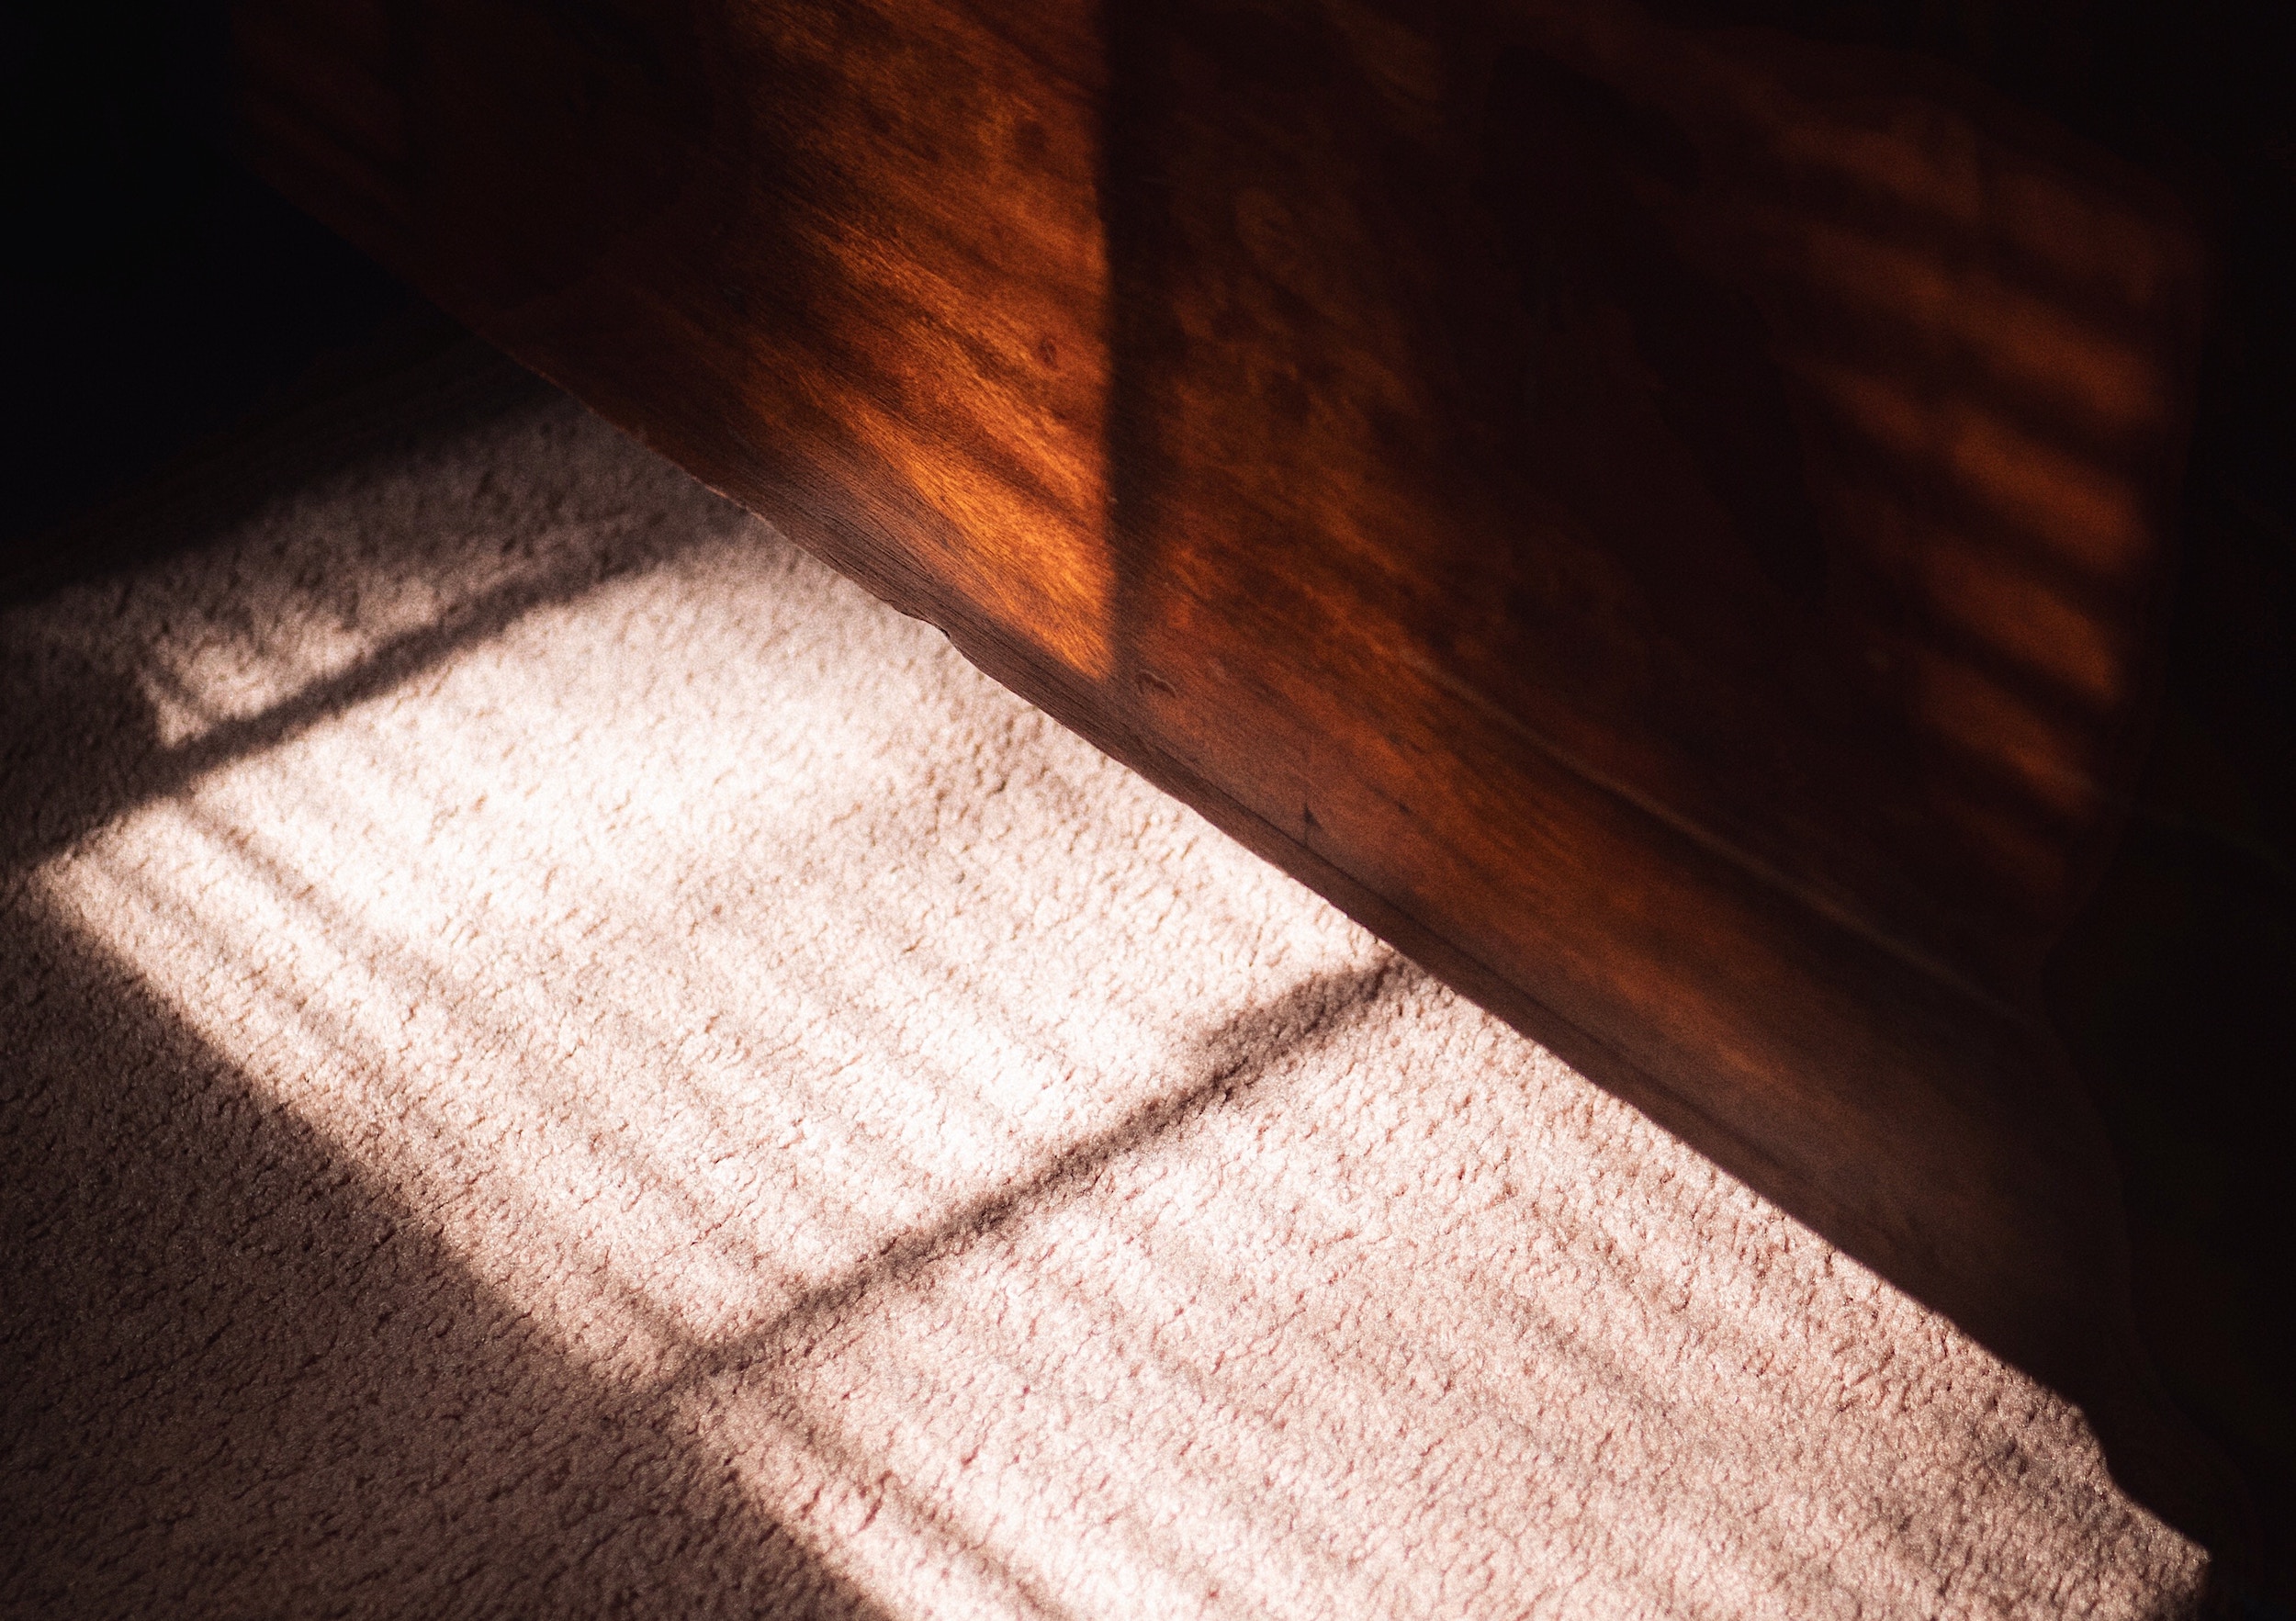 Light coming in through window showing on carpeted floor